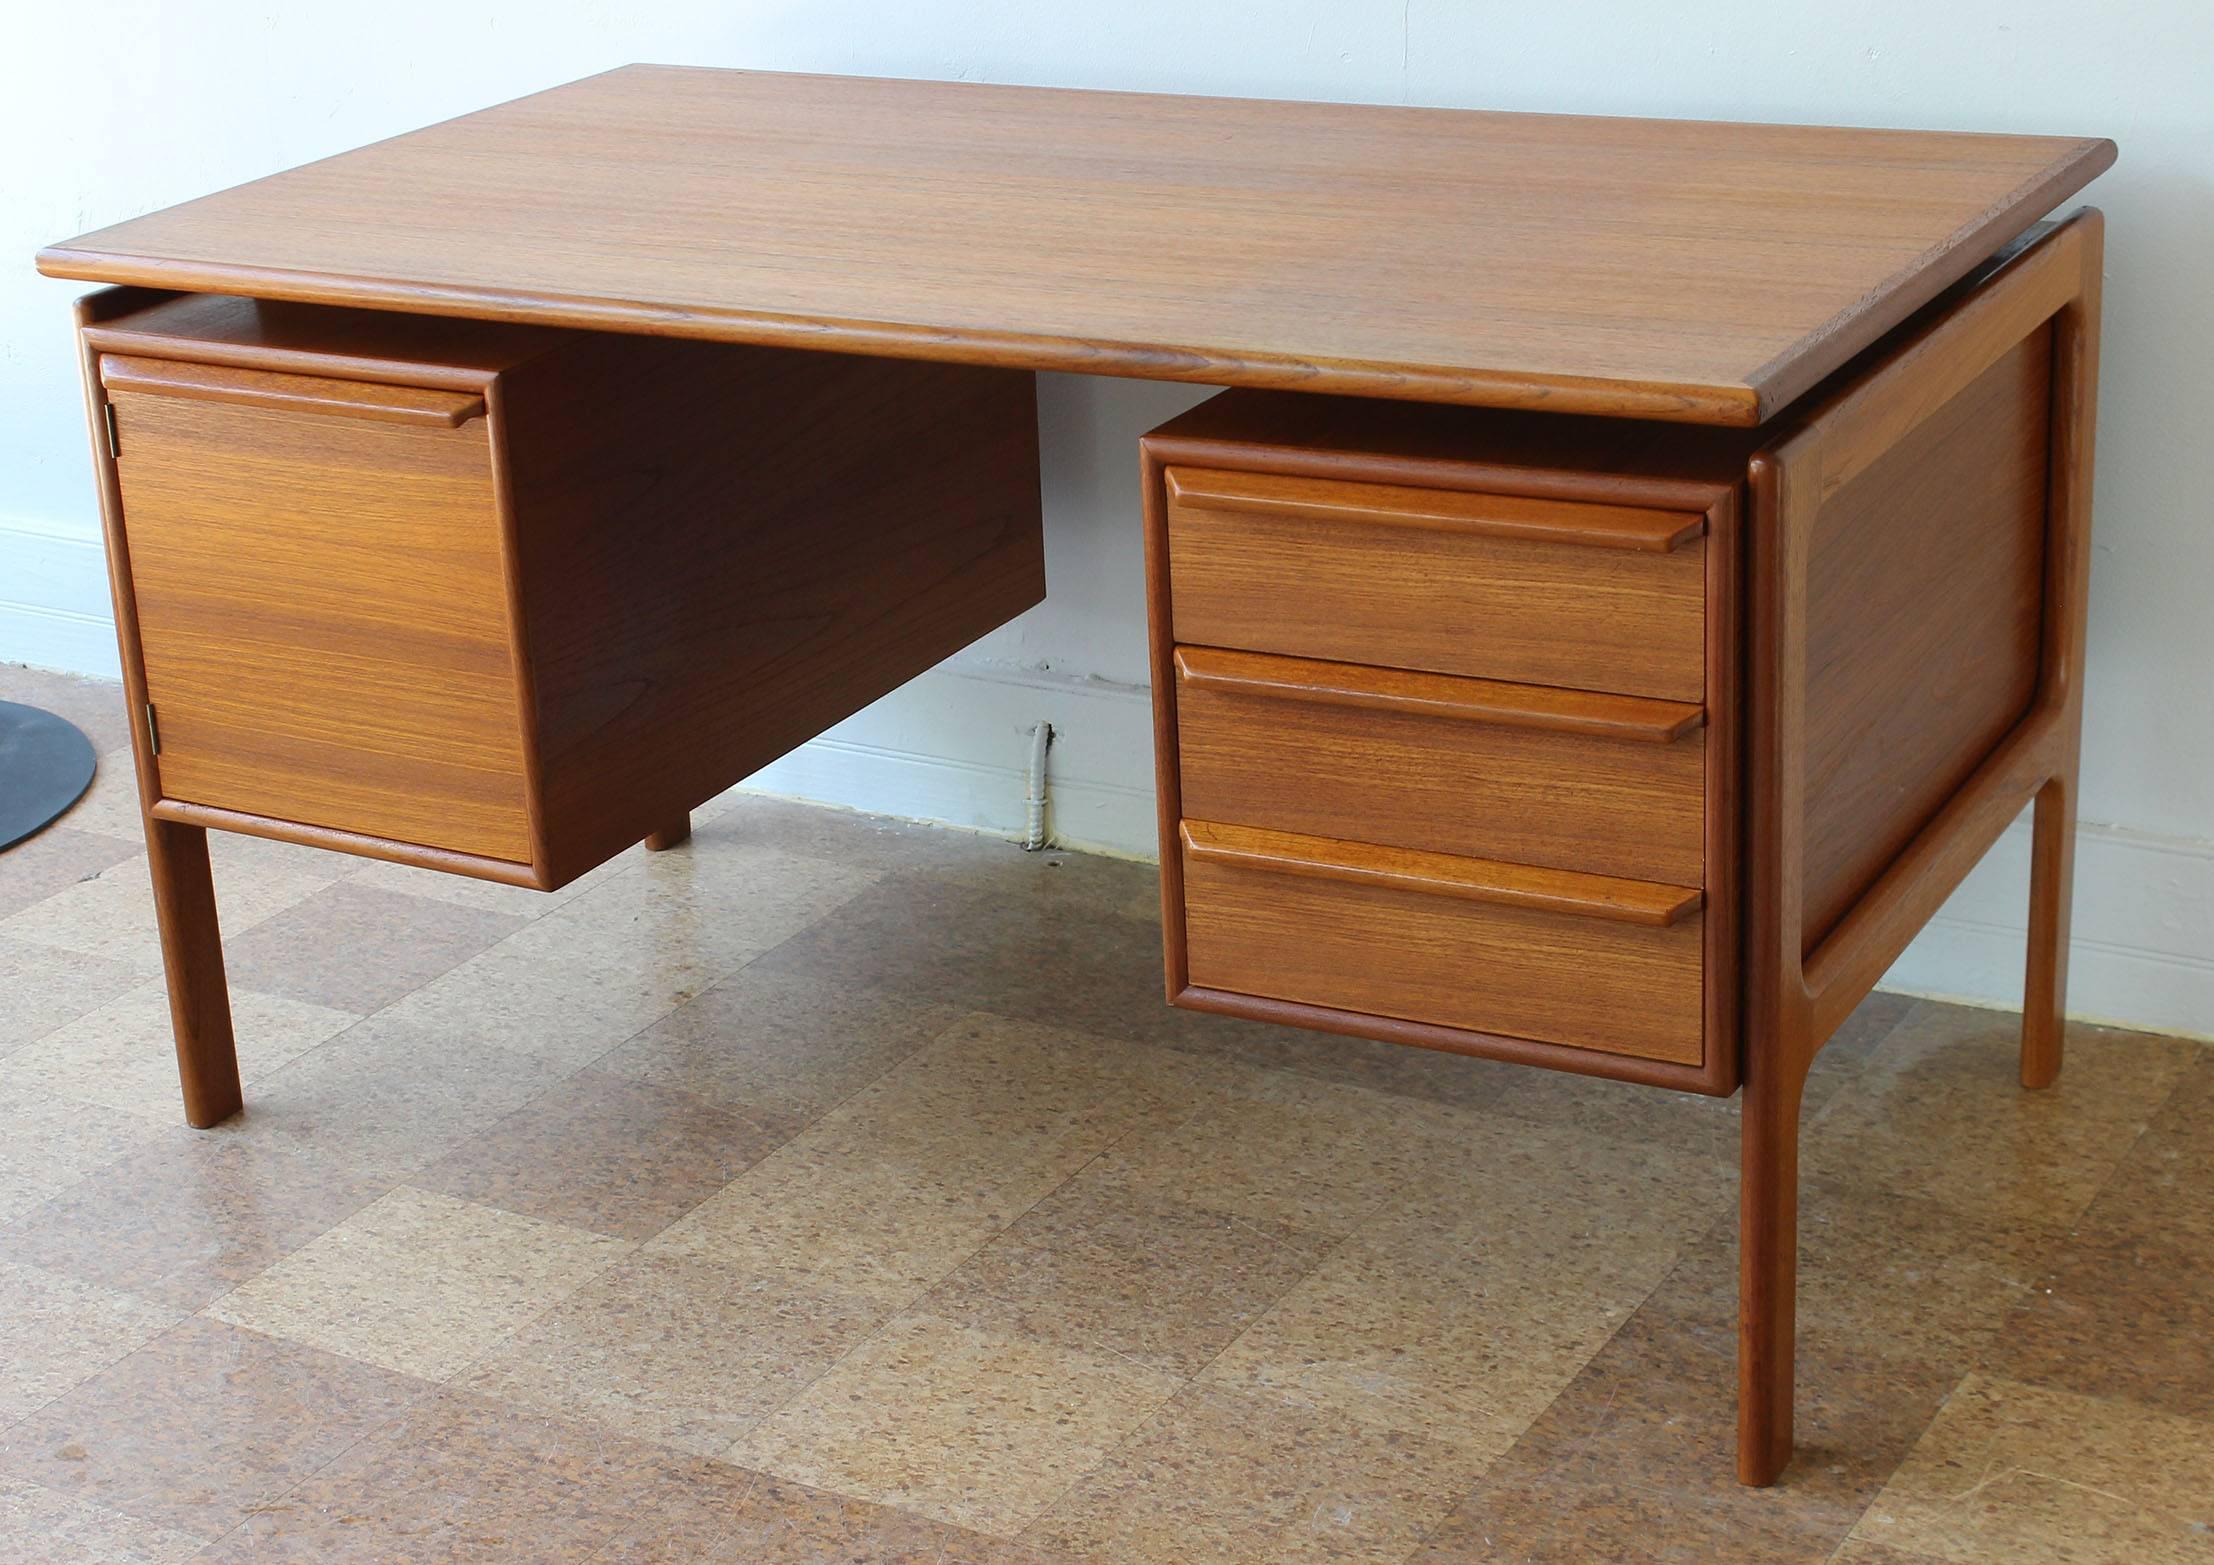 A Danish teak desk with floating top and drawers and cabinets in the style of Kai Kristiansen.

Measures: 19.25 inch opening between drawer/boxes.

